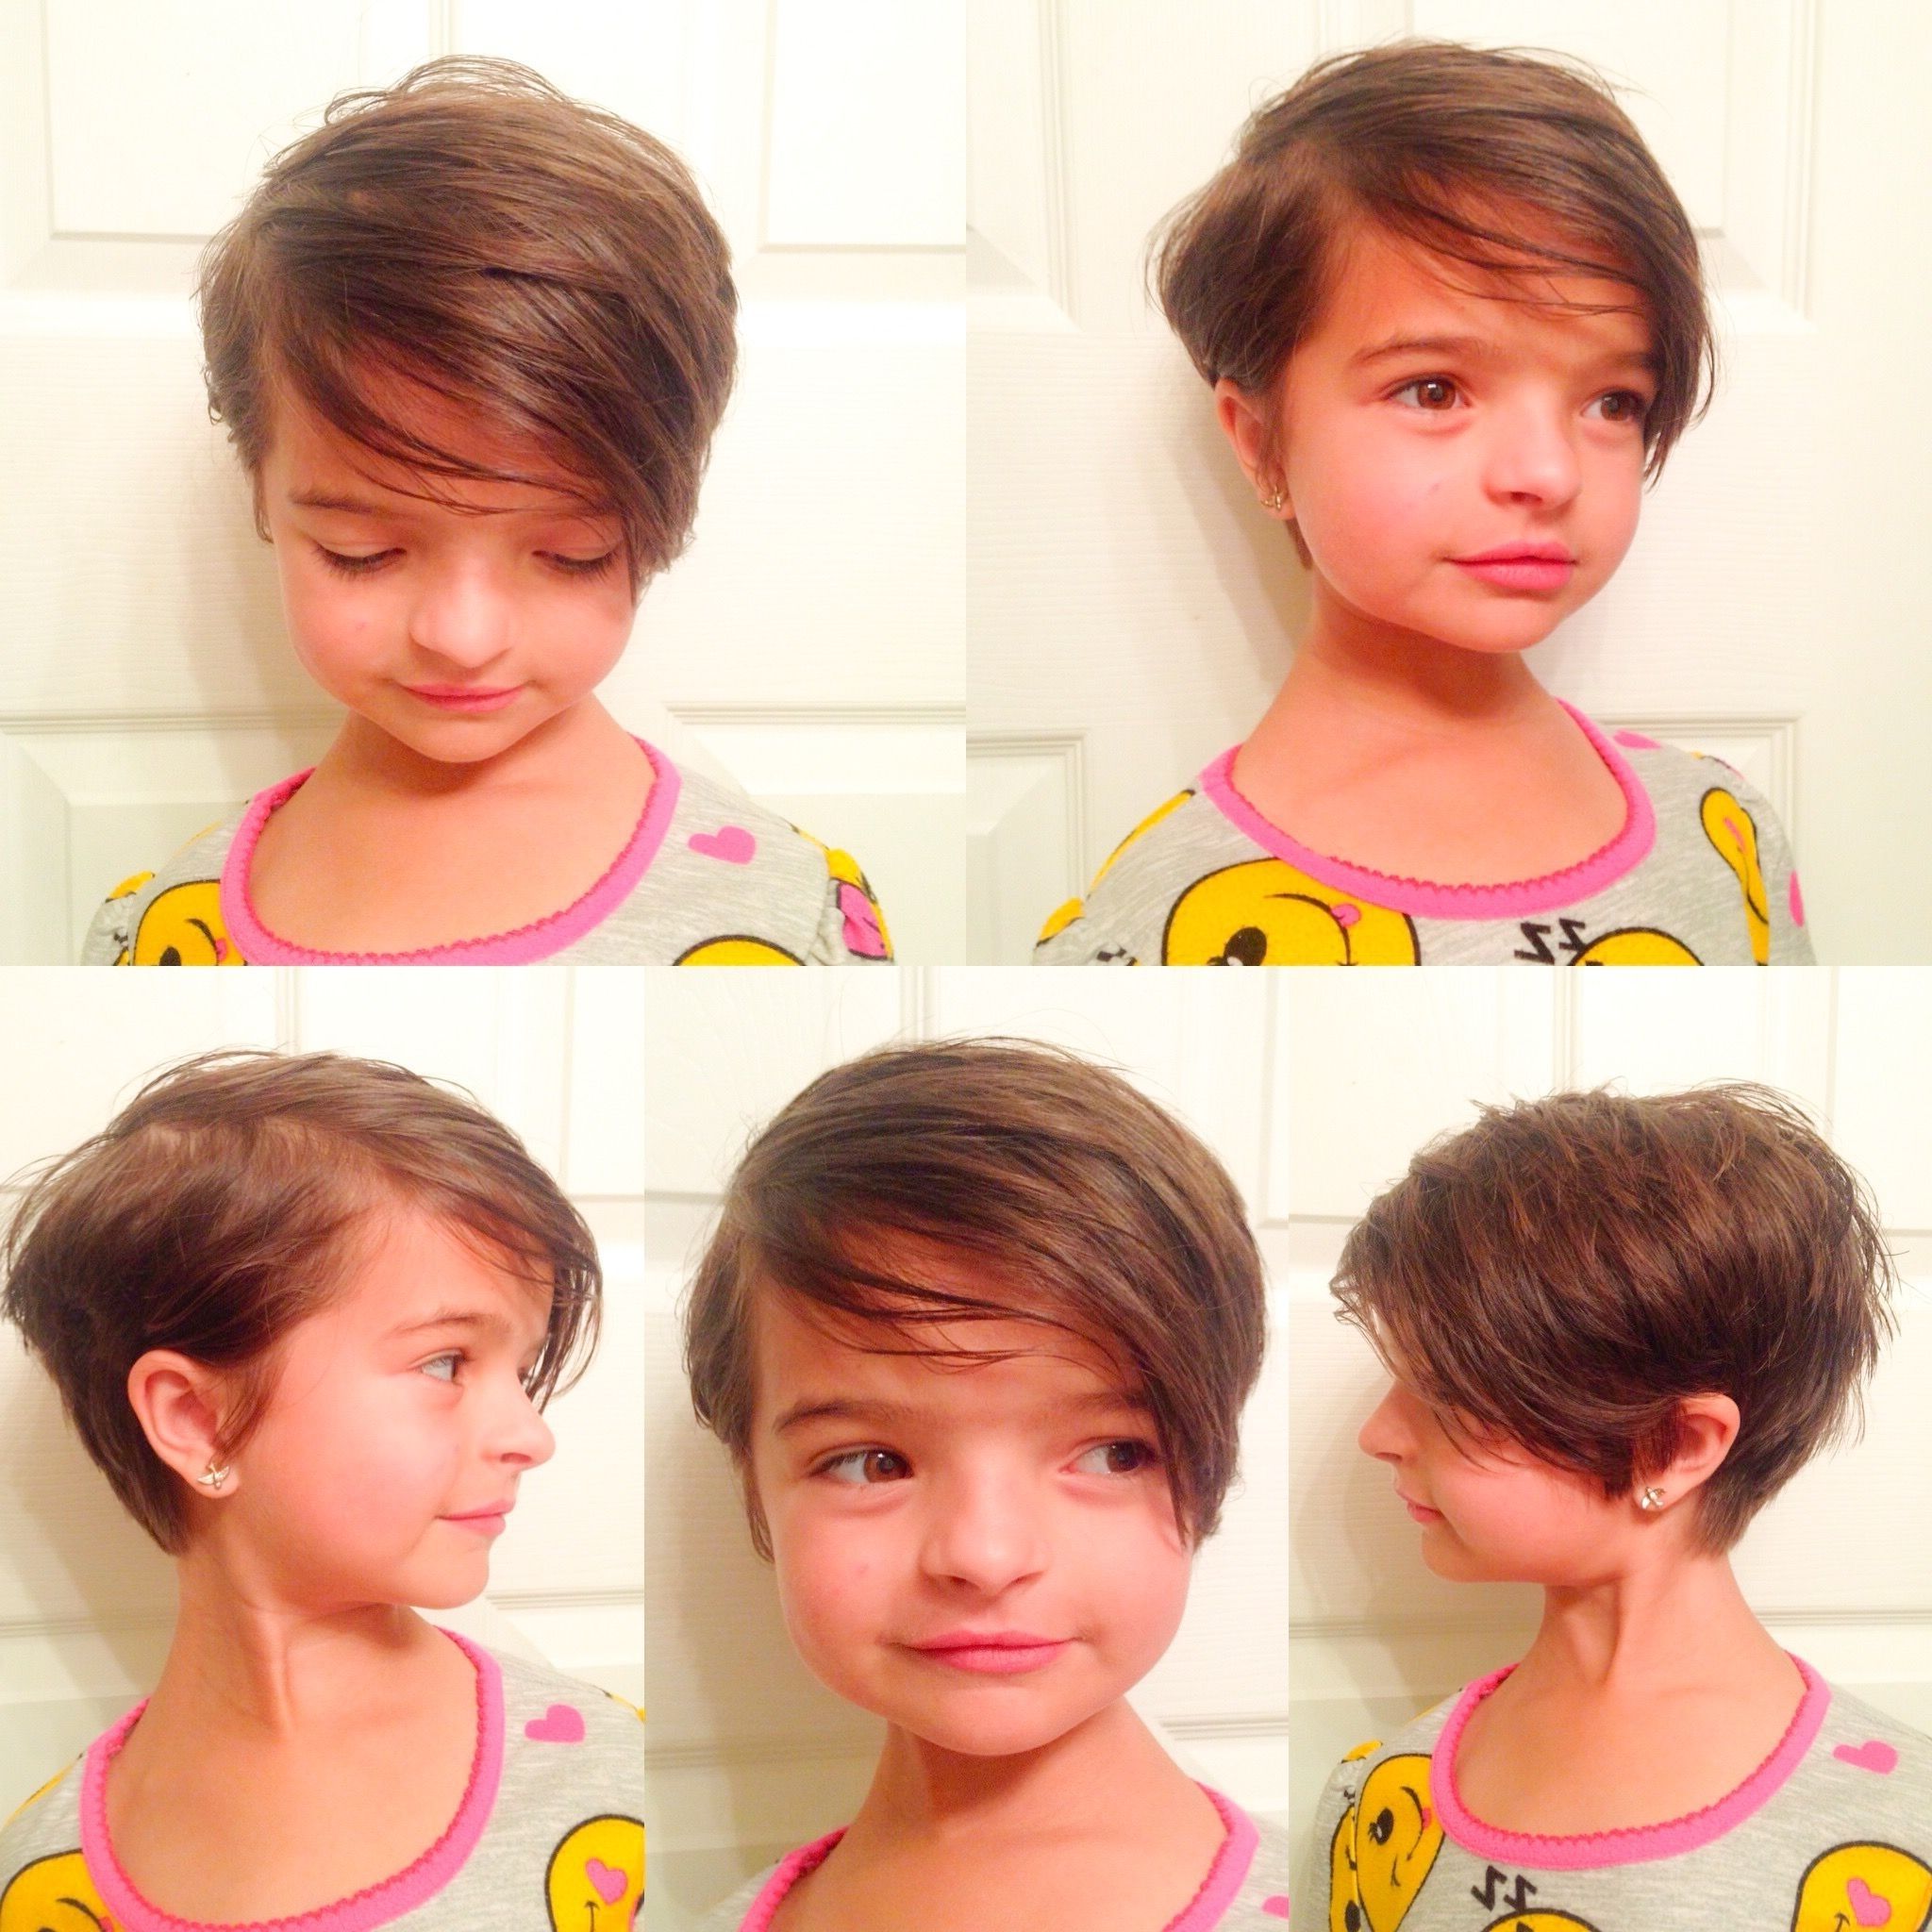 Little Girl's Haircut, Little Girl's Hairstyle, Pixie Cut, Short Regarding Most Up To Date Pixie Hairstyles For Little Girls (Photo 1 of 15)